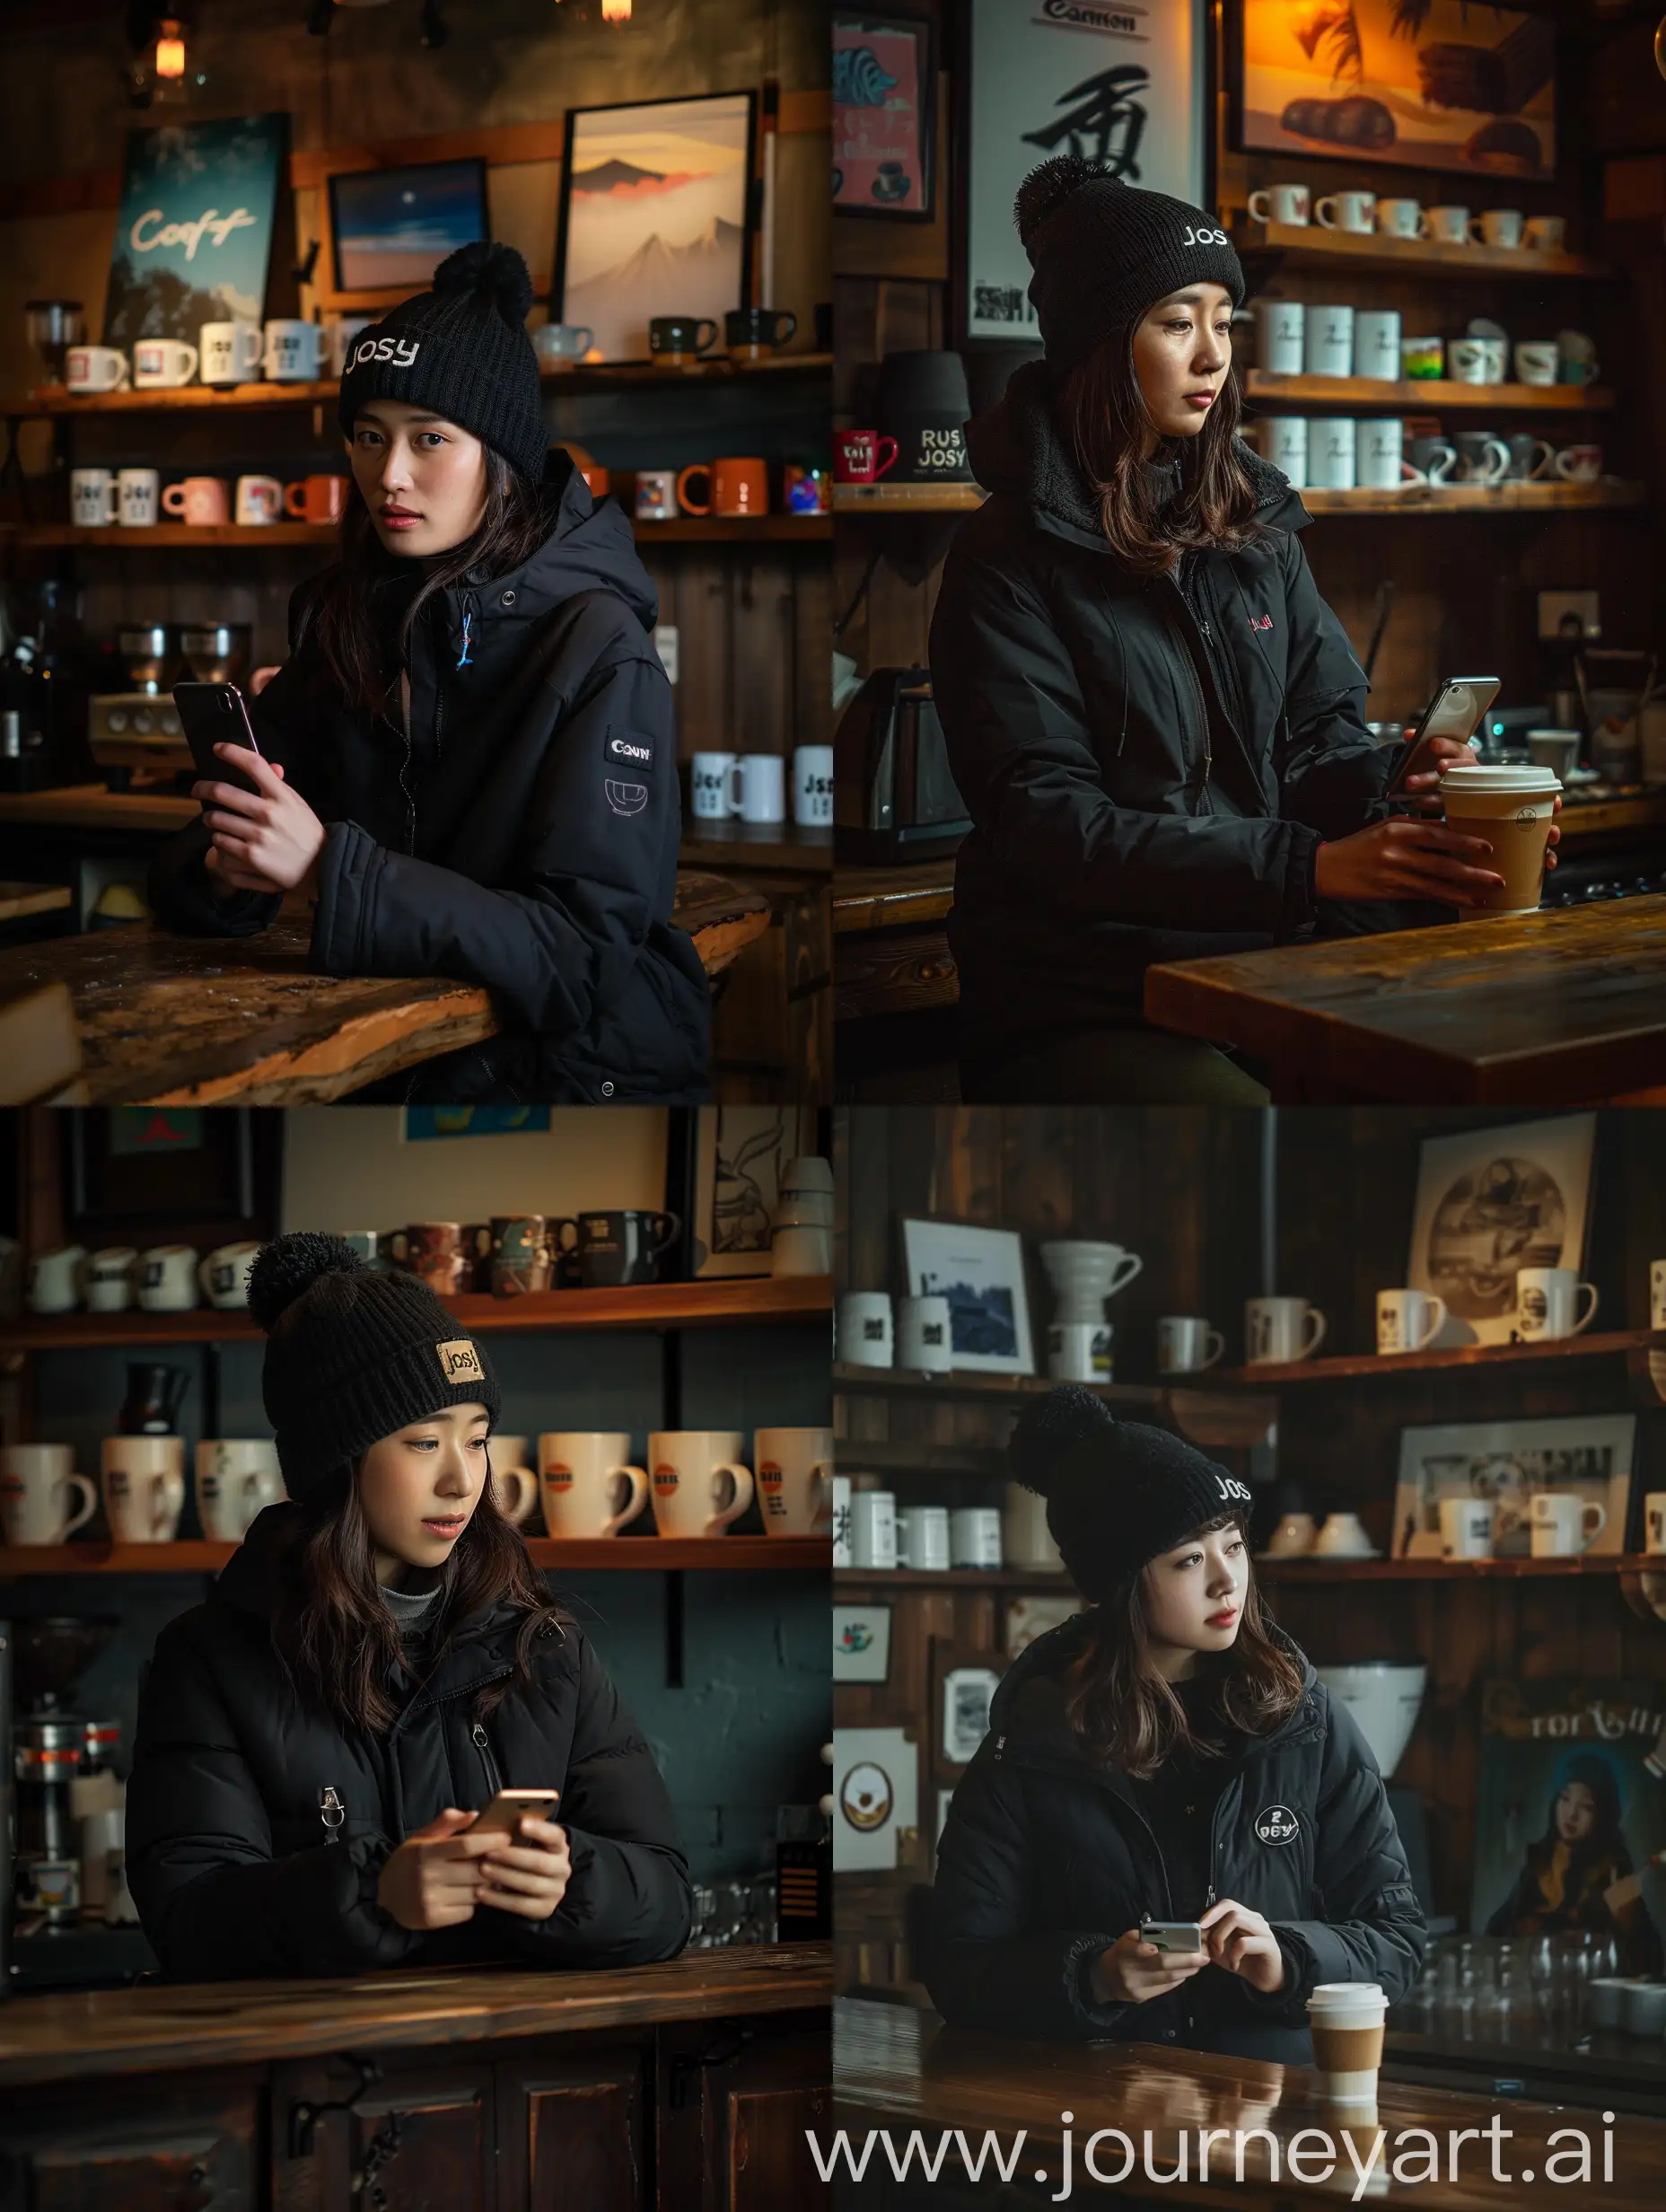 photo of an attractive Asian woman sitting at a bar in a dark, moody coffee shop with dim lighting and wooden accents, holding an iPhone while looking away, wearing a black winter jacket and a beanie hat with the brand "Josh", drinking a cappuccino, surrounded a shelf of mugs and artwork on the wall behind it, taken with a Canon EOS R6 Mark II Mirrorless camera in a minimalist photography style